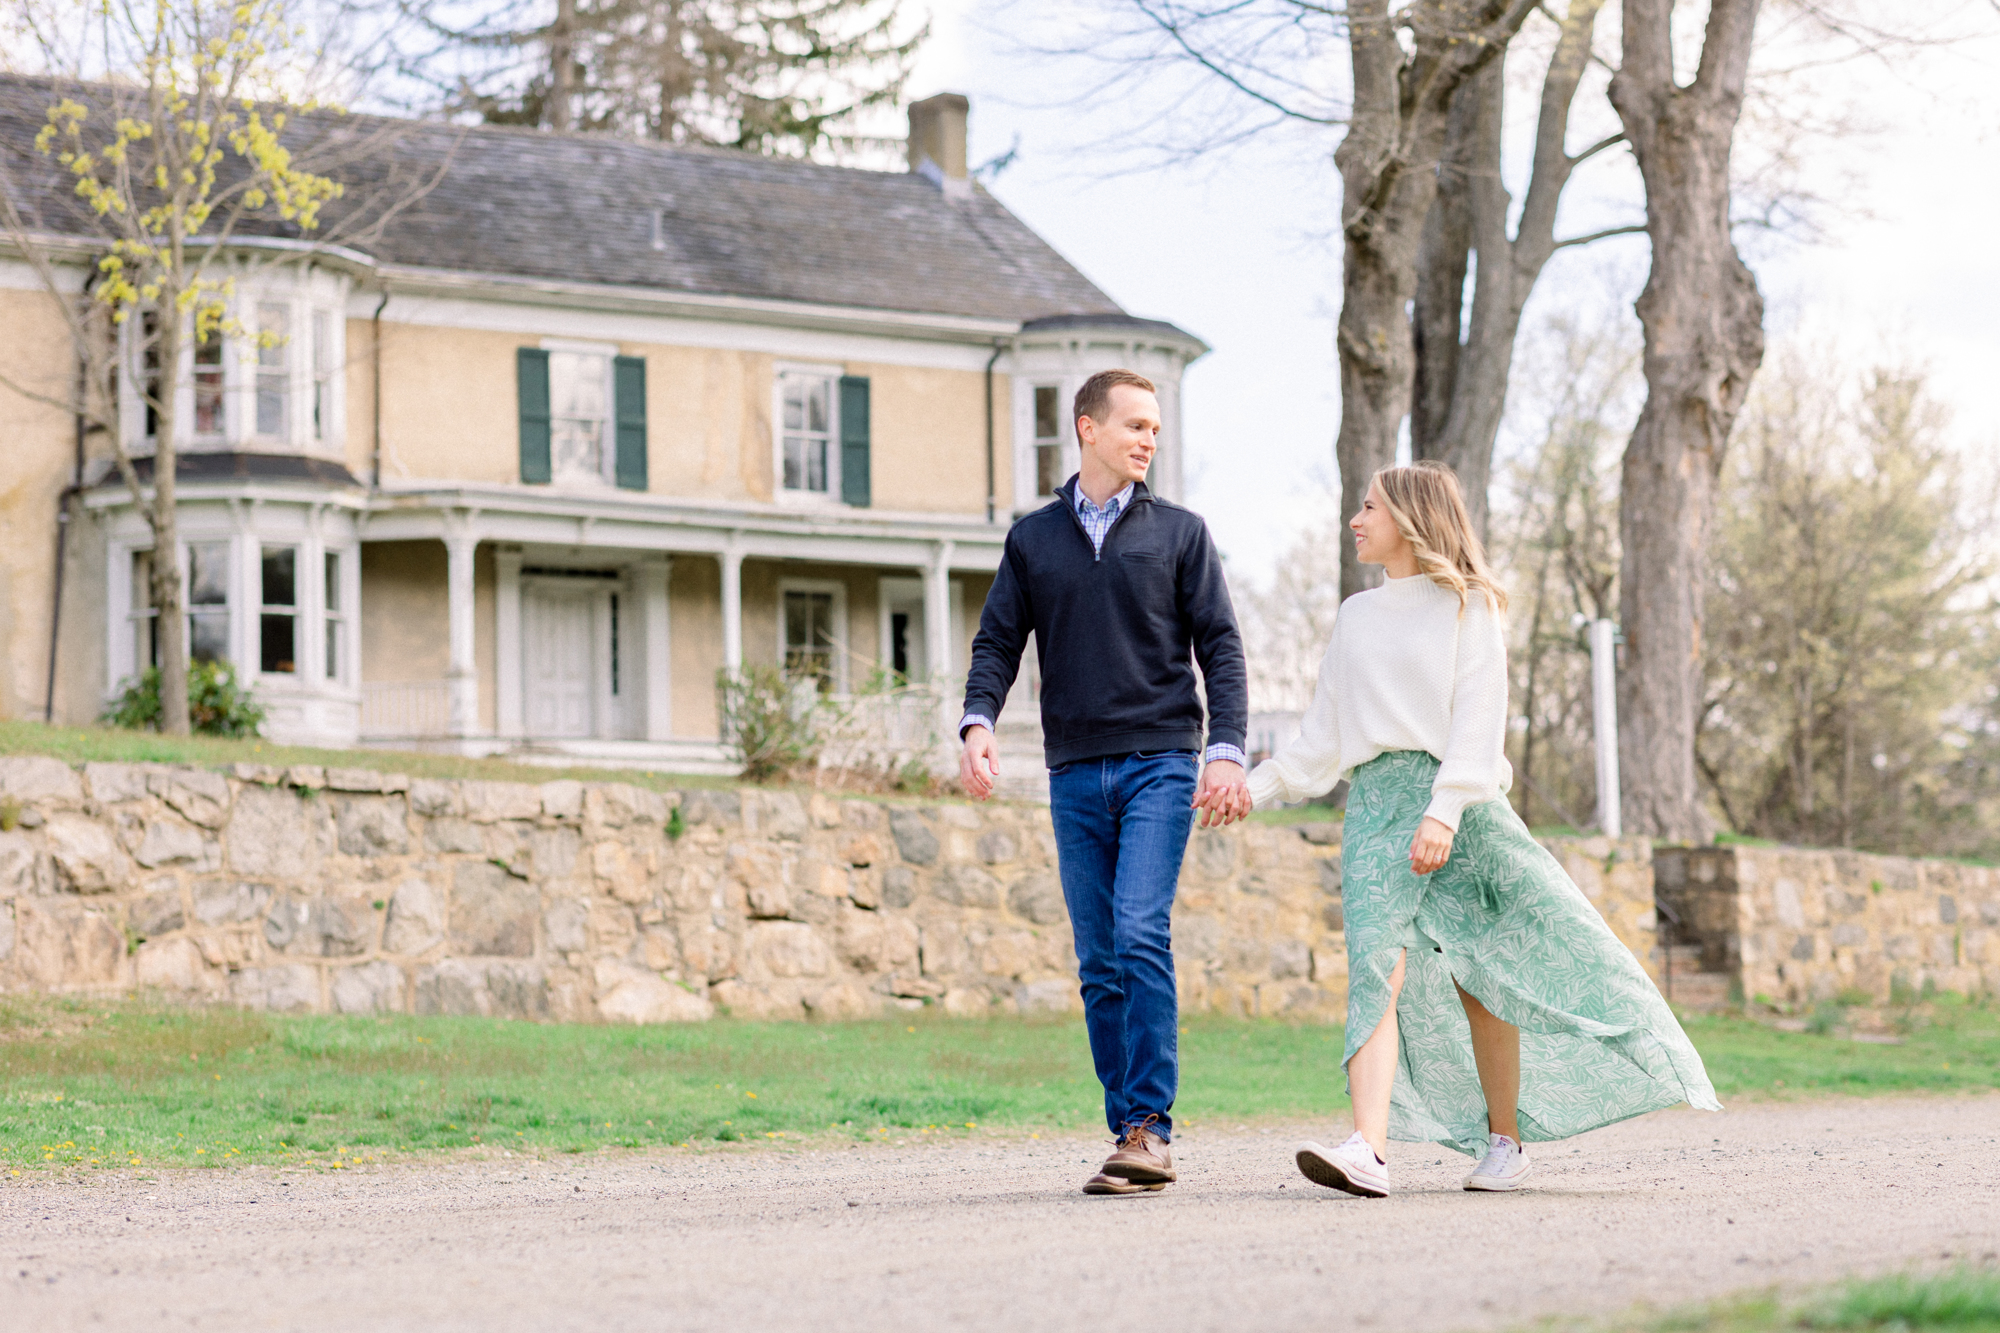 Scenic Waterloo Village Engagement Photos in Springy New Jersey